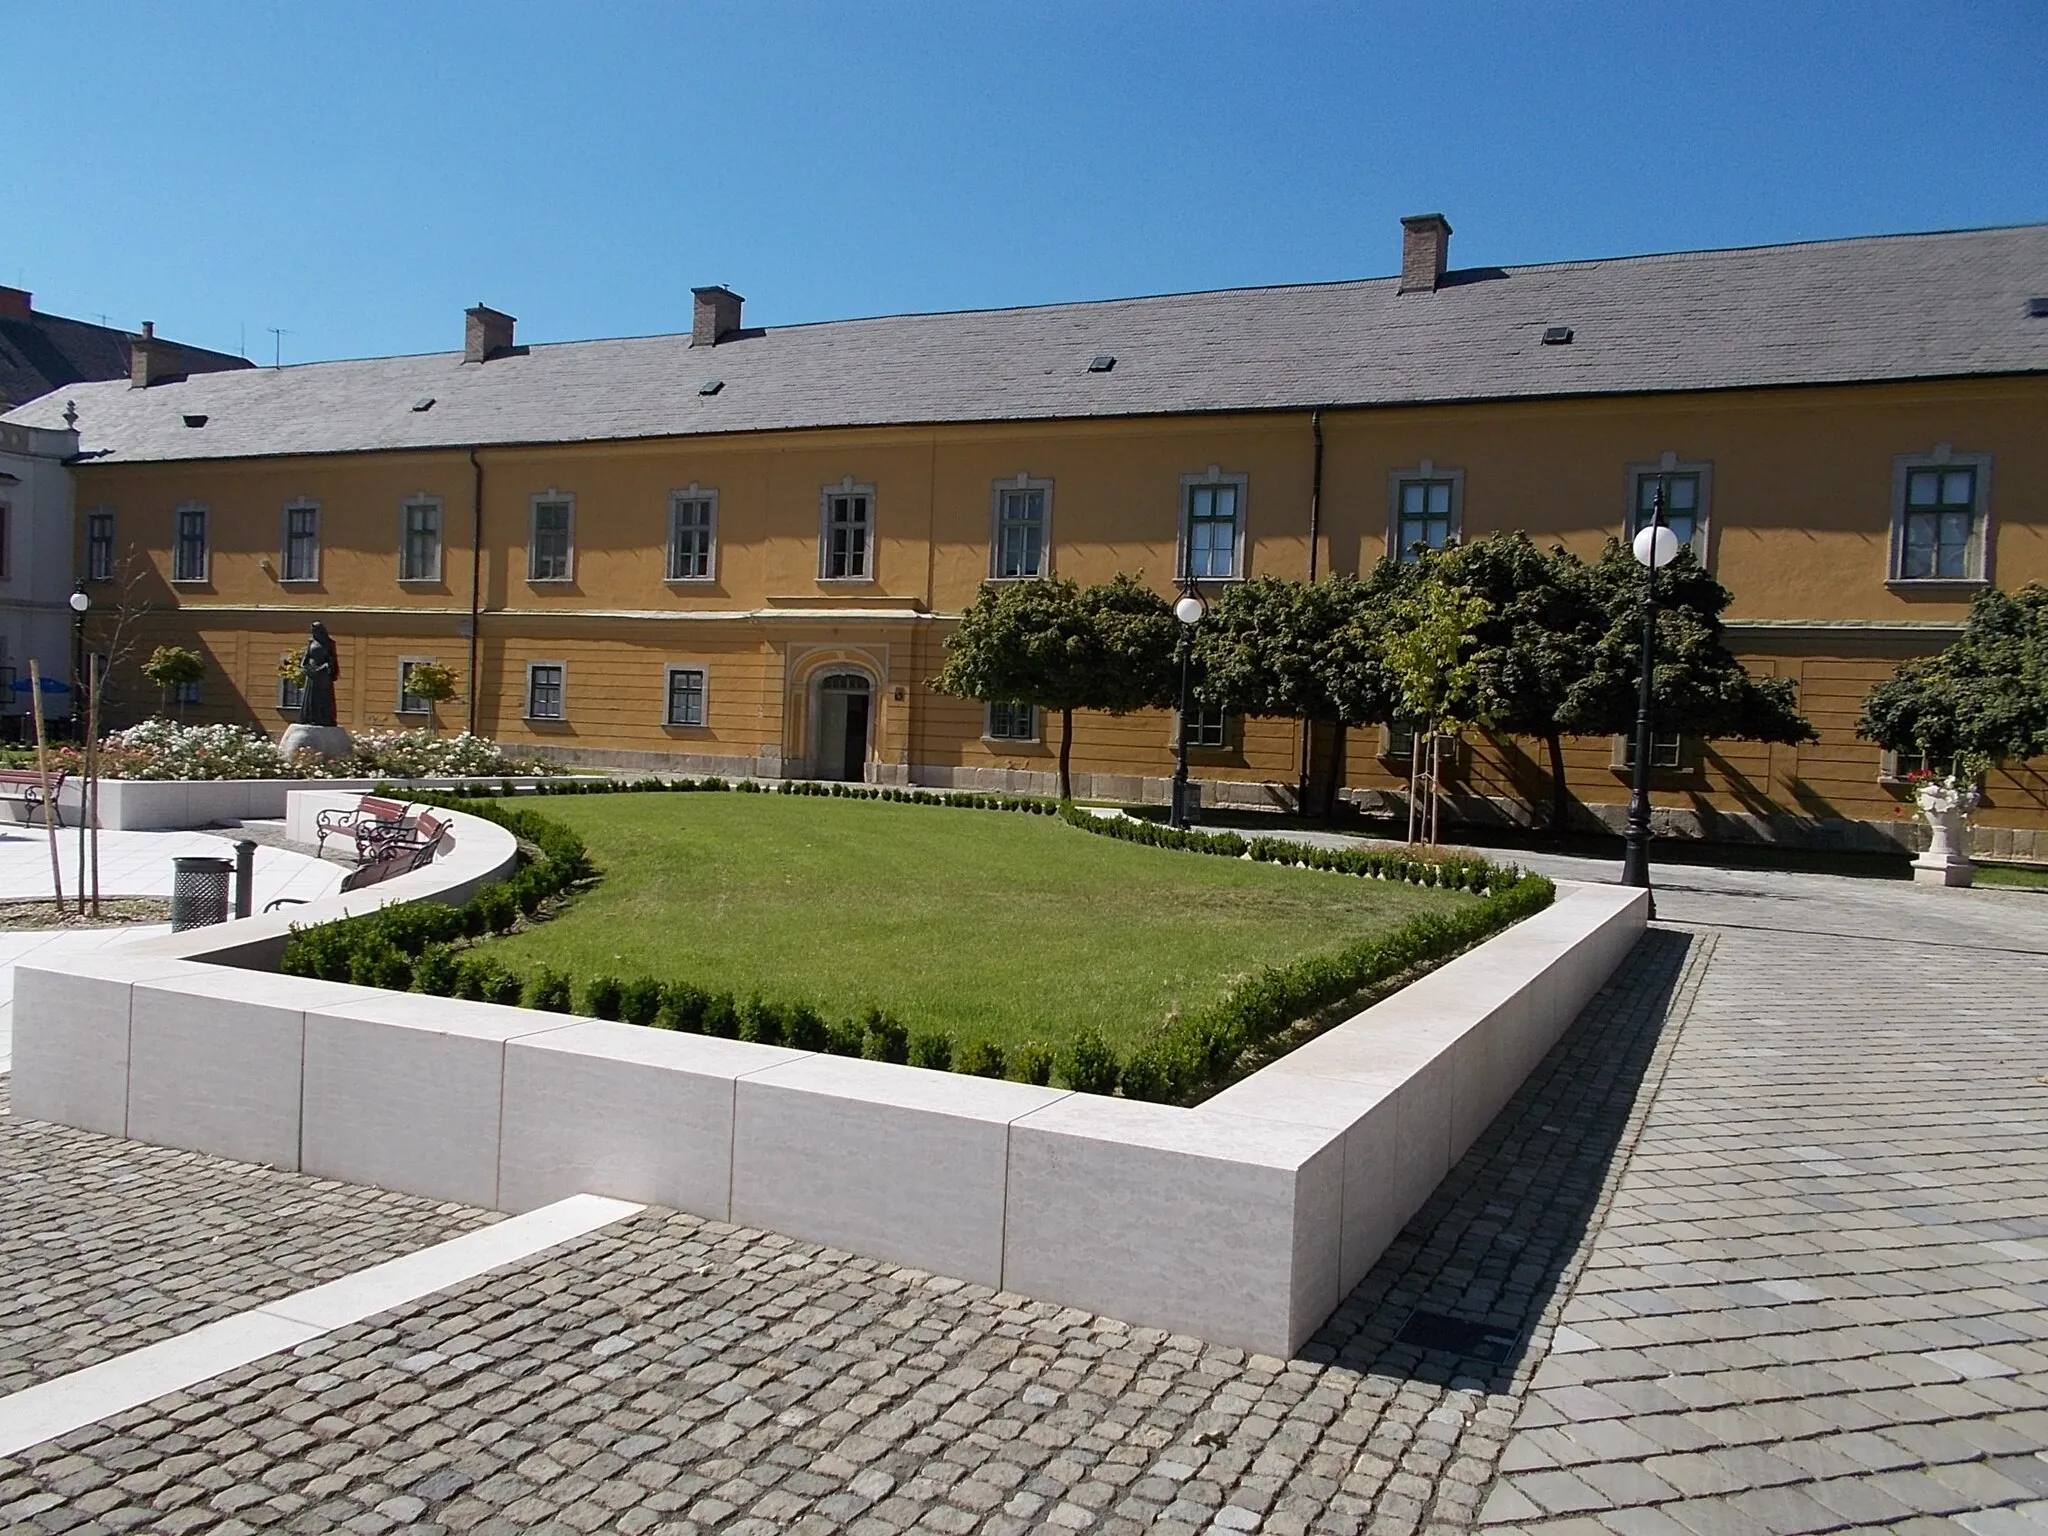 Photo showing: : Archiepiscopal Palace. - 1-3 Széchenyi Street, Eger, Heves County, Hungary.